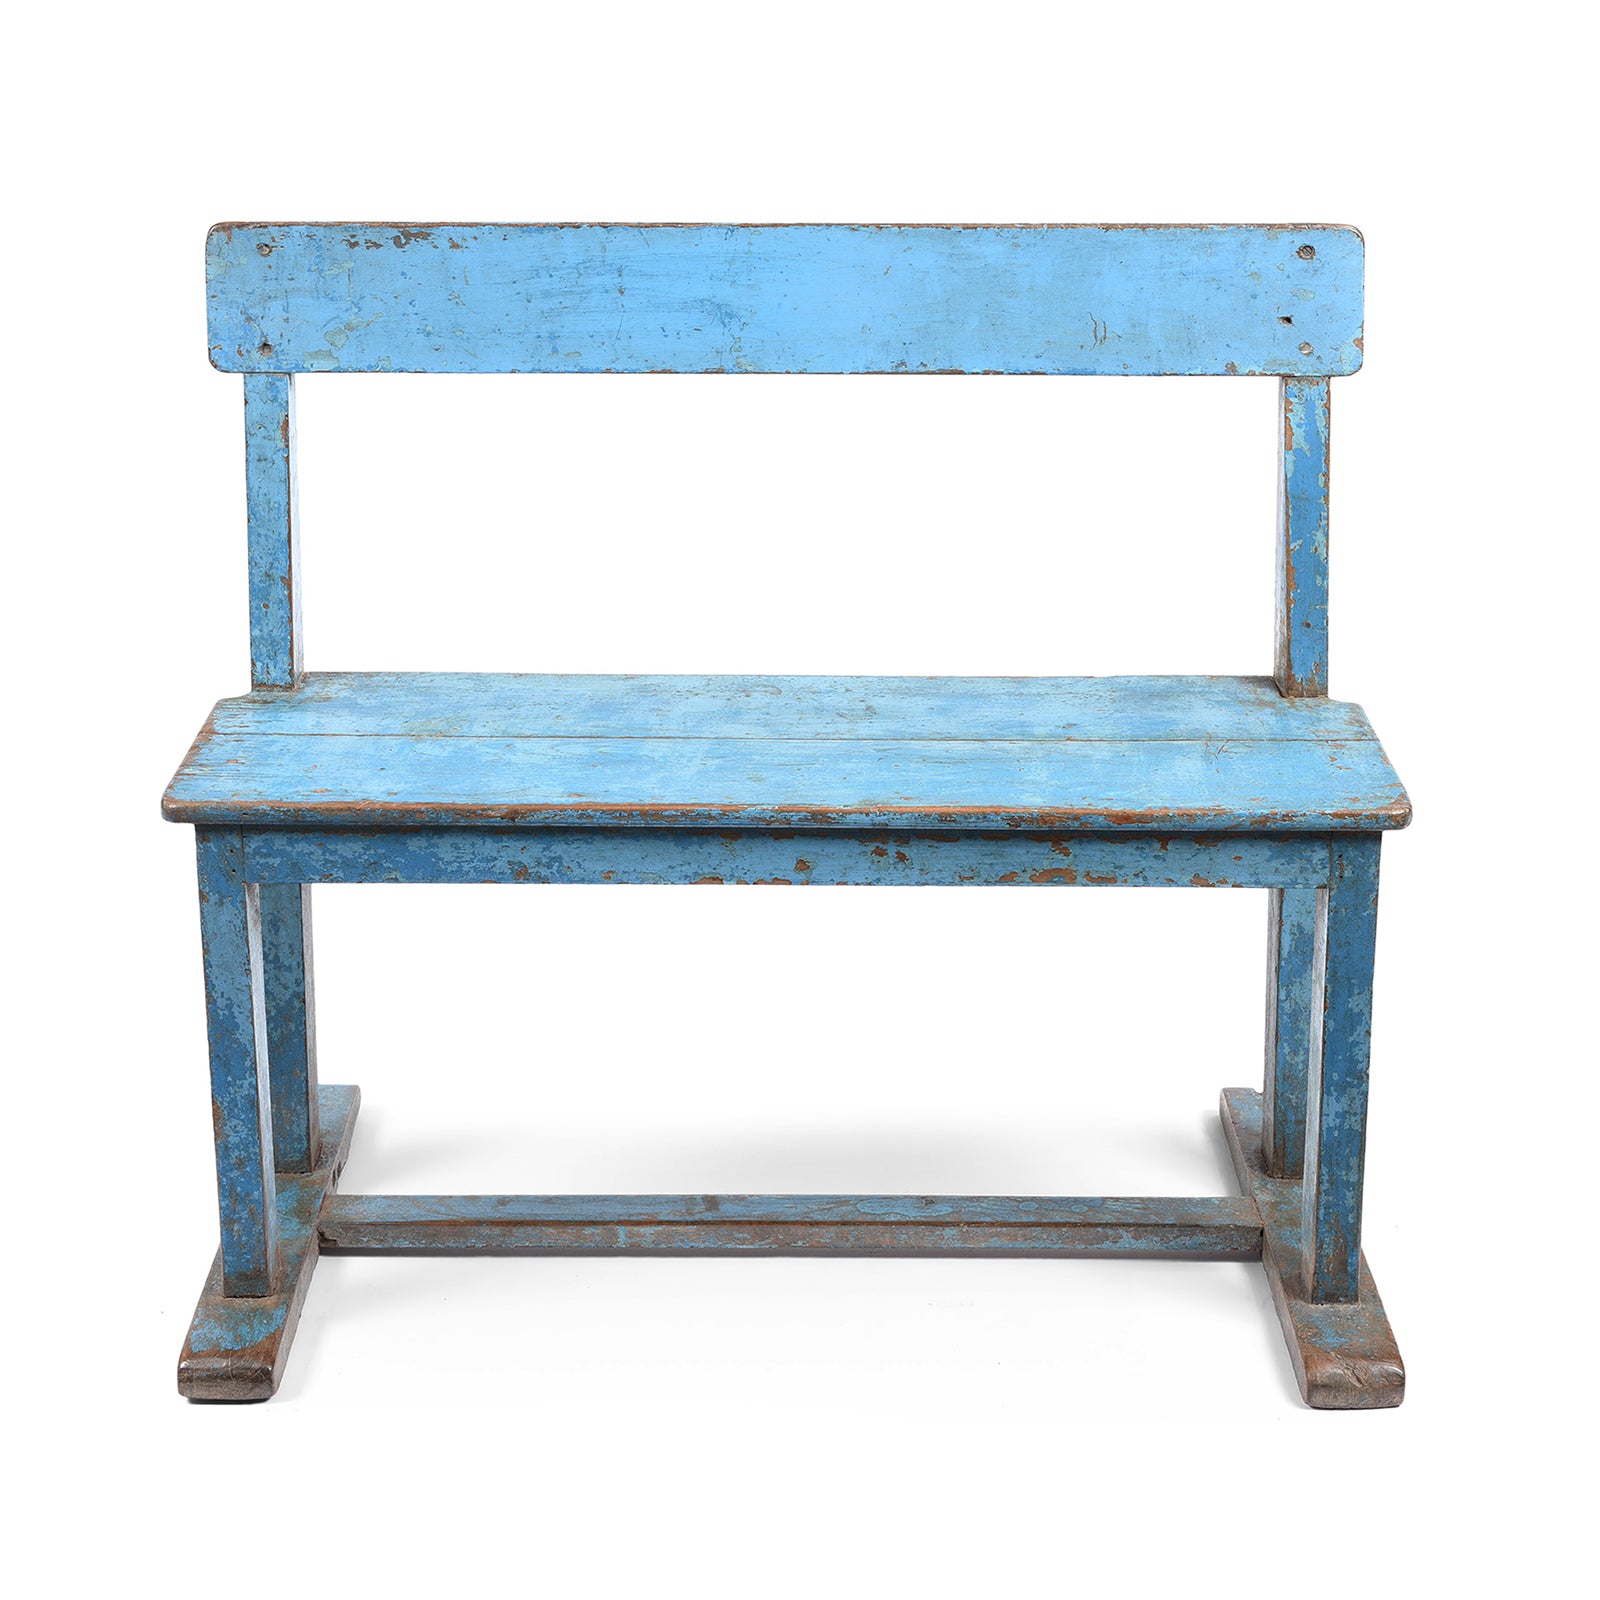 Angled View Of Painted Indian Teak School Bench - Ca 1930 | Indigo Antiques